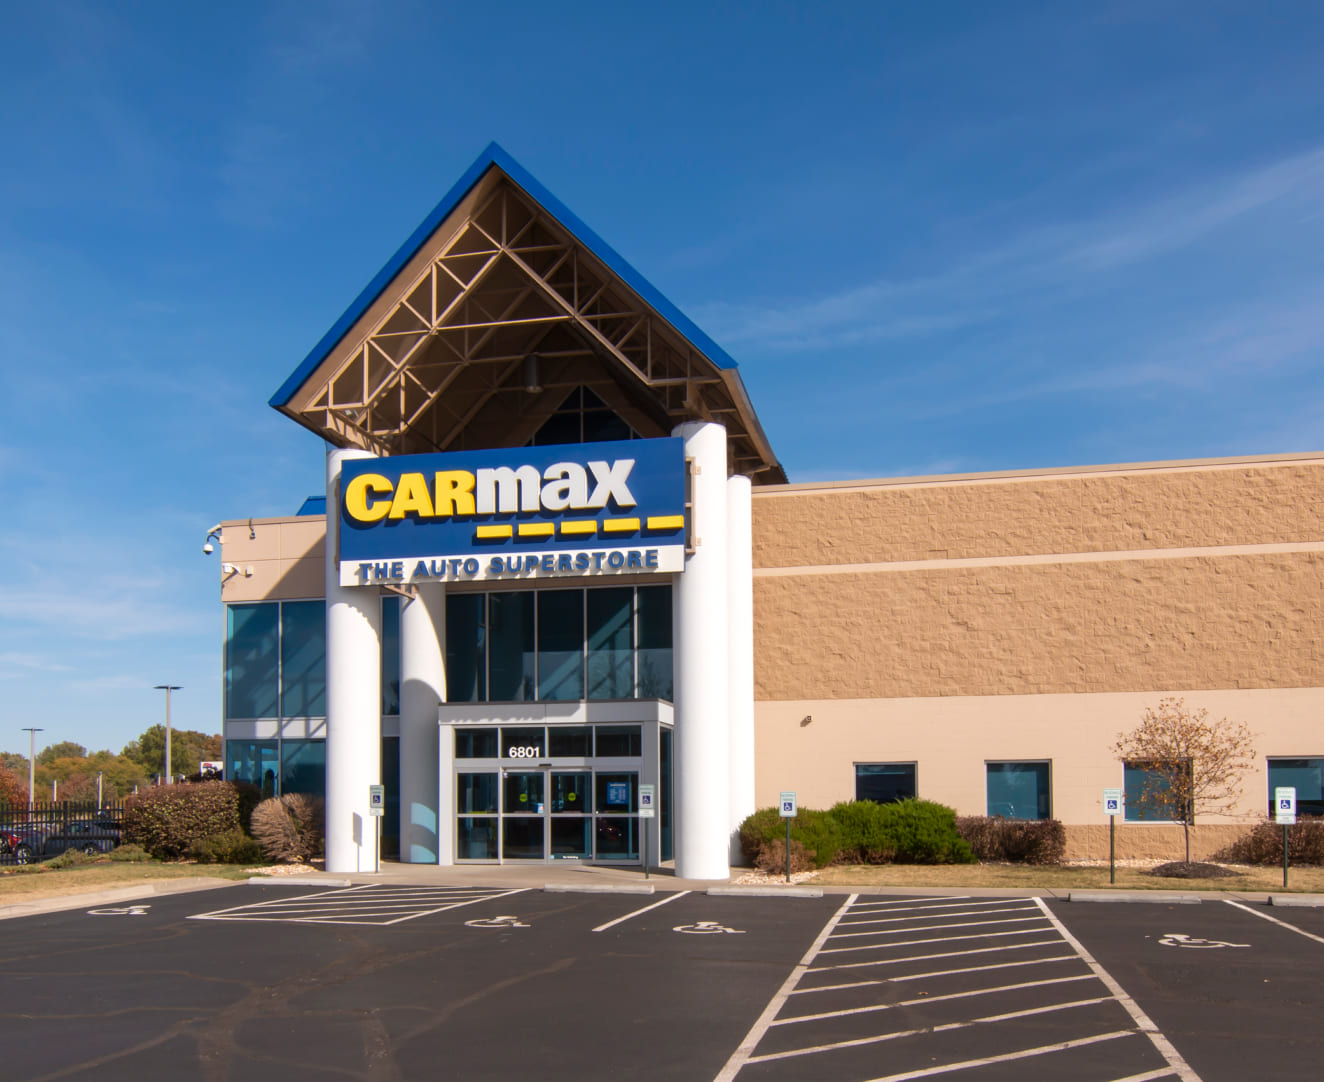 A rightside view of the front entrance of the CarMax at 6801 E. Frontage Road in Overland Park, KS.